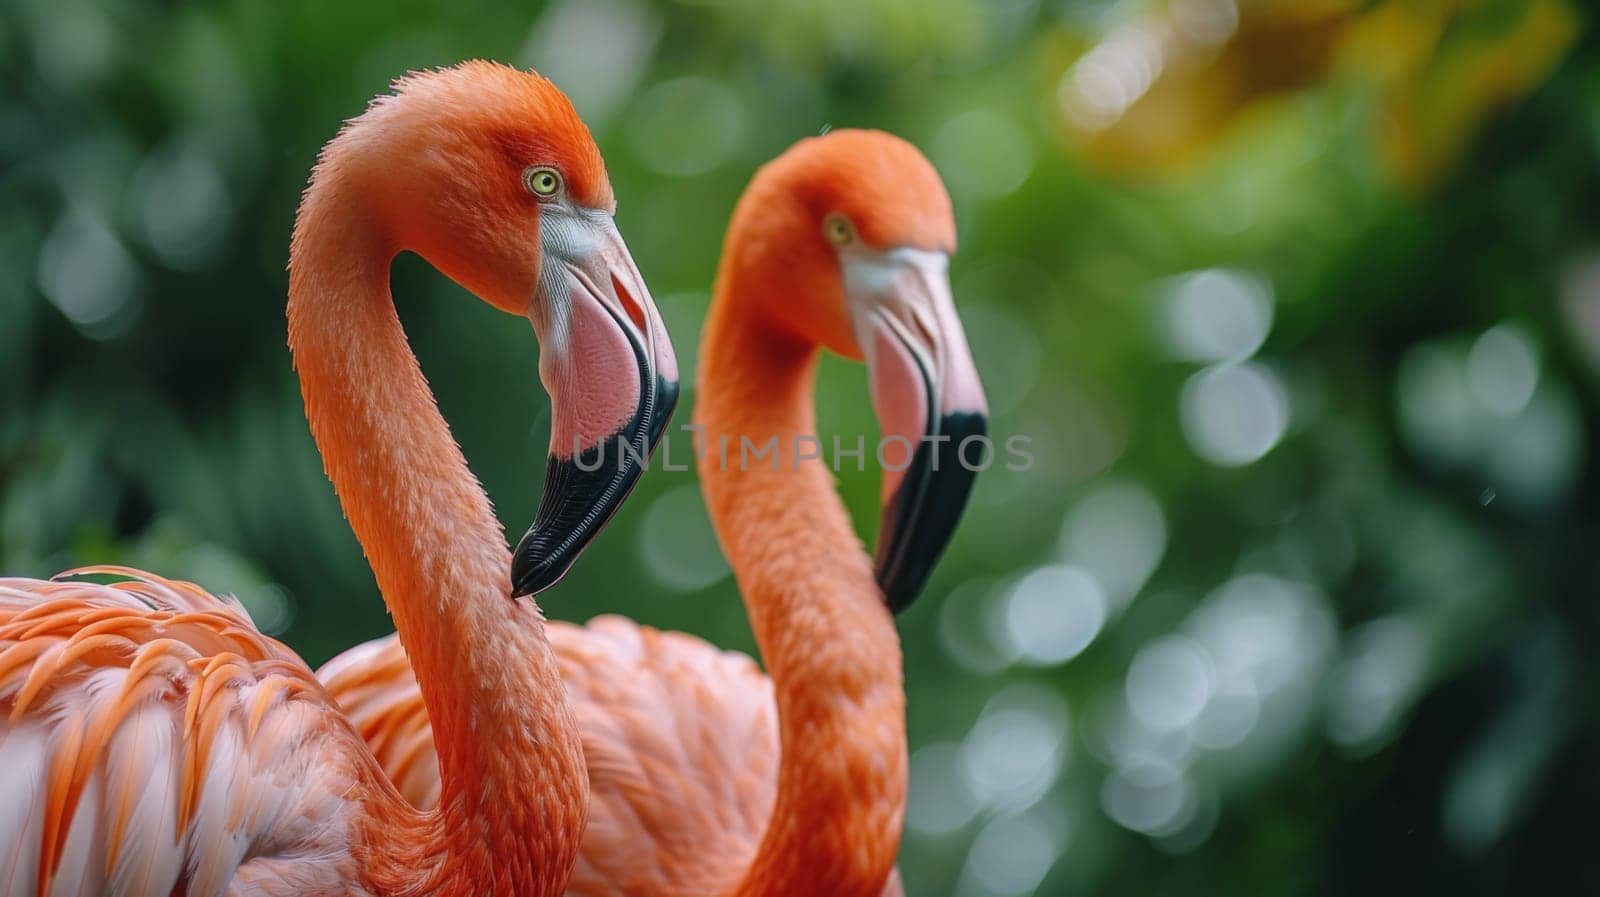 Two flamingos standing next to each other with their heads turned